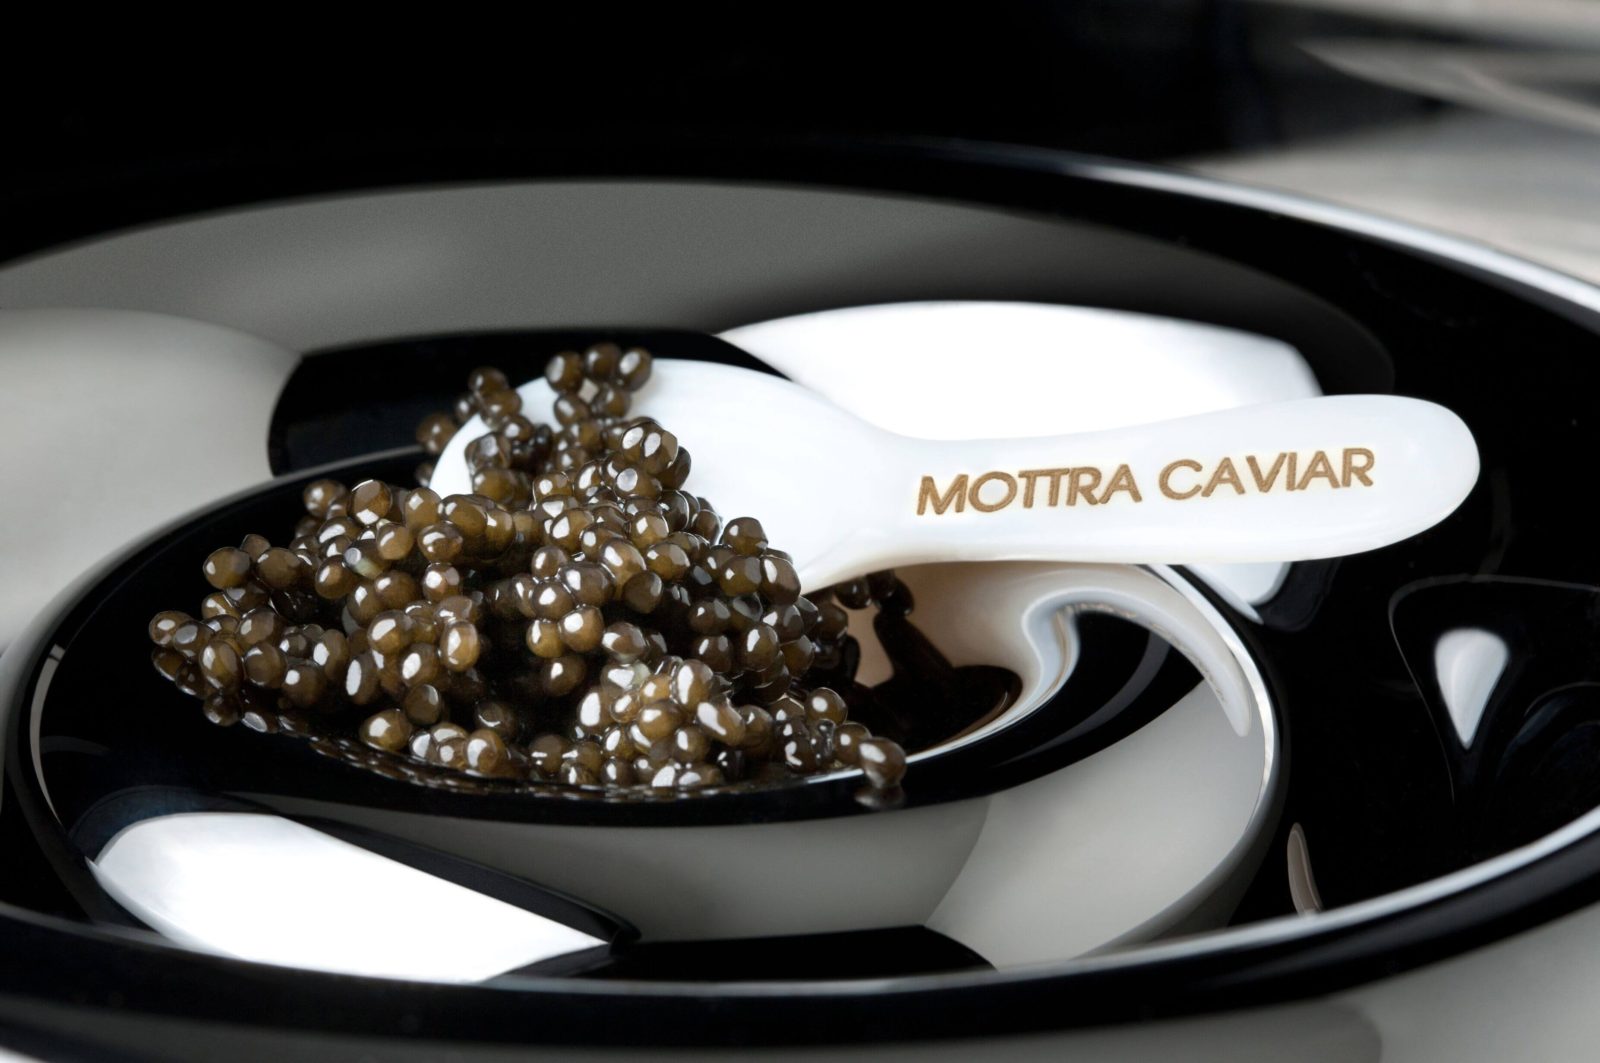 Mottra caviar has quickly found favour with top chefs, retailers and custom...